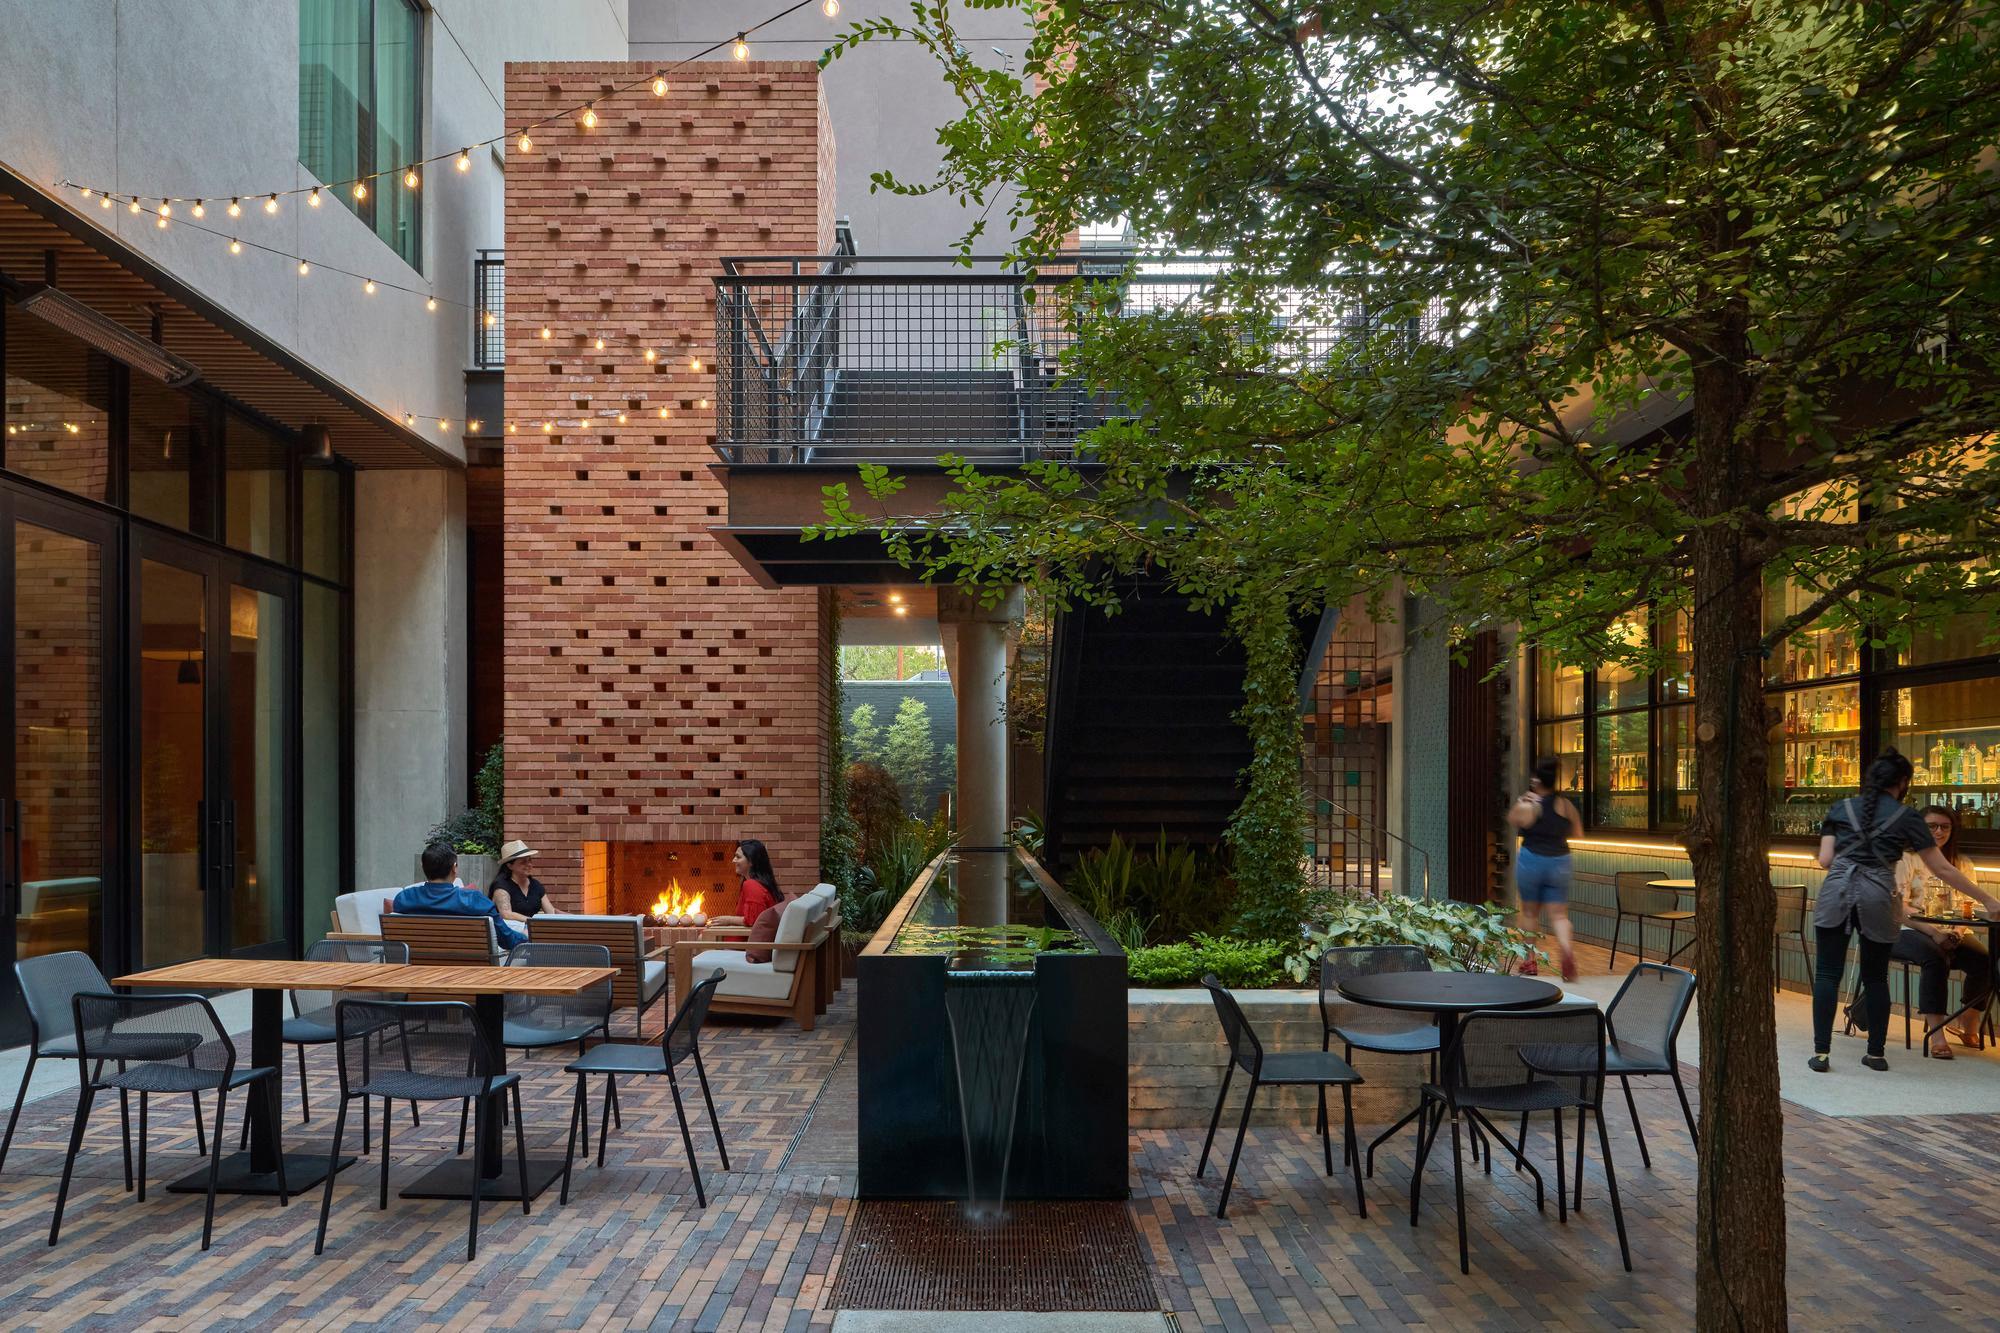 Image of the inner patio at the Canopy Hotel Austin